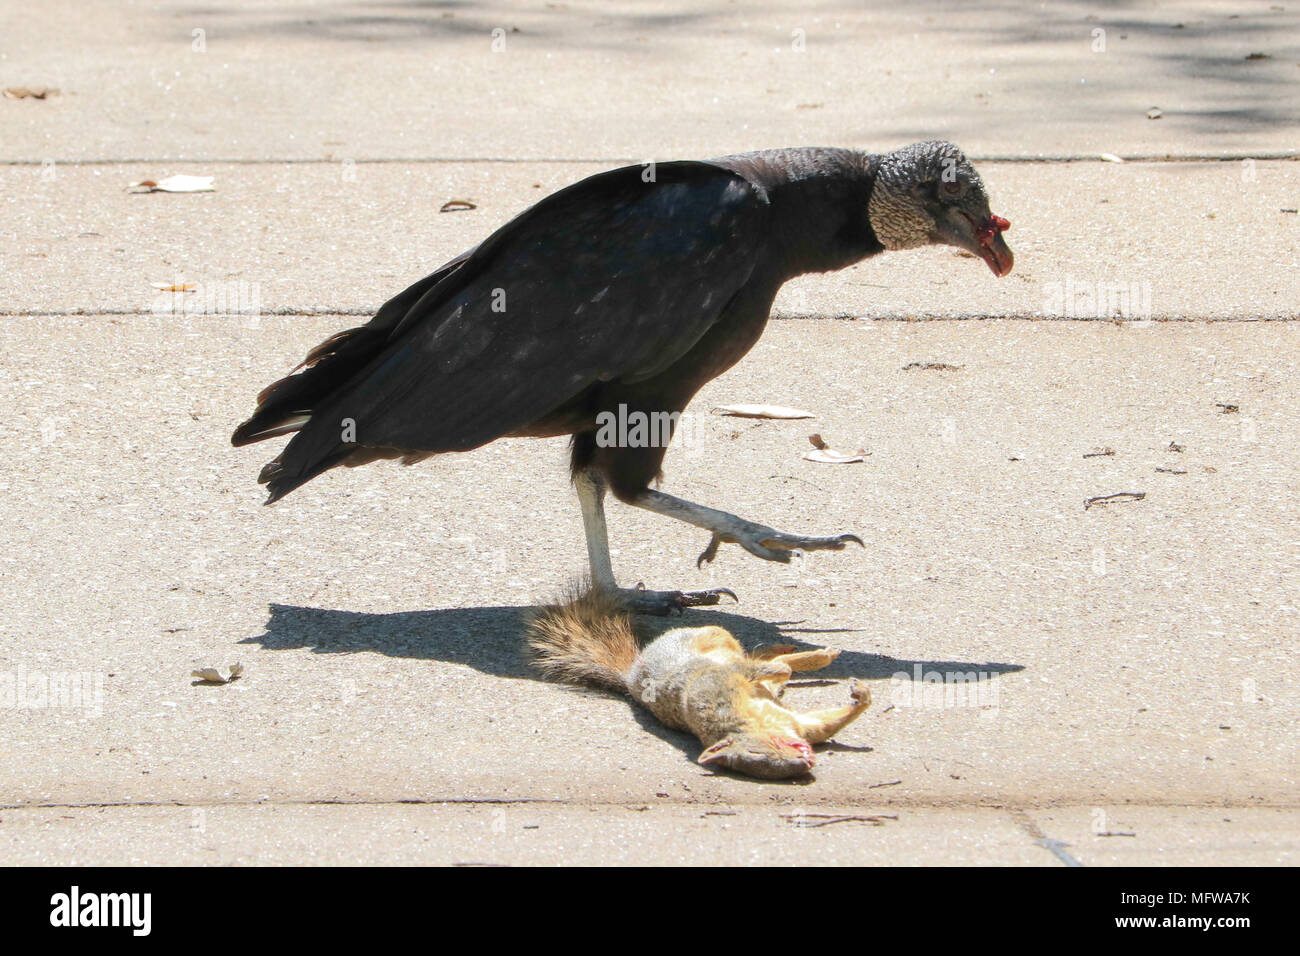 Vulture eating squirrel that was hit by car Stock Photo